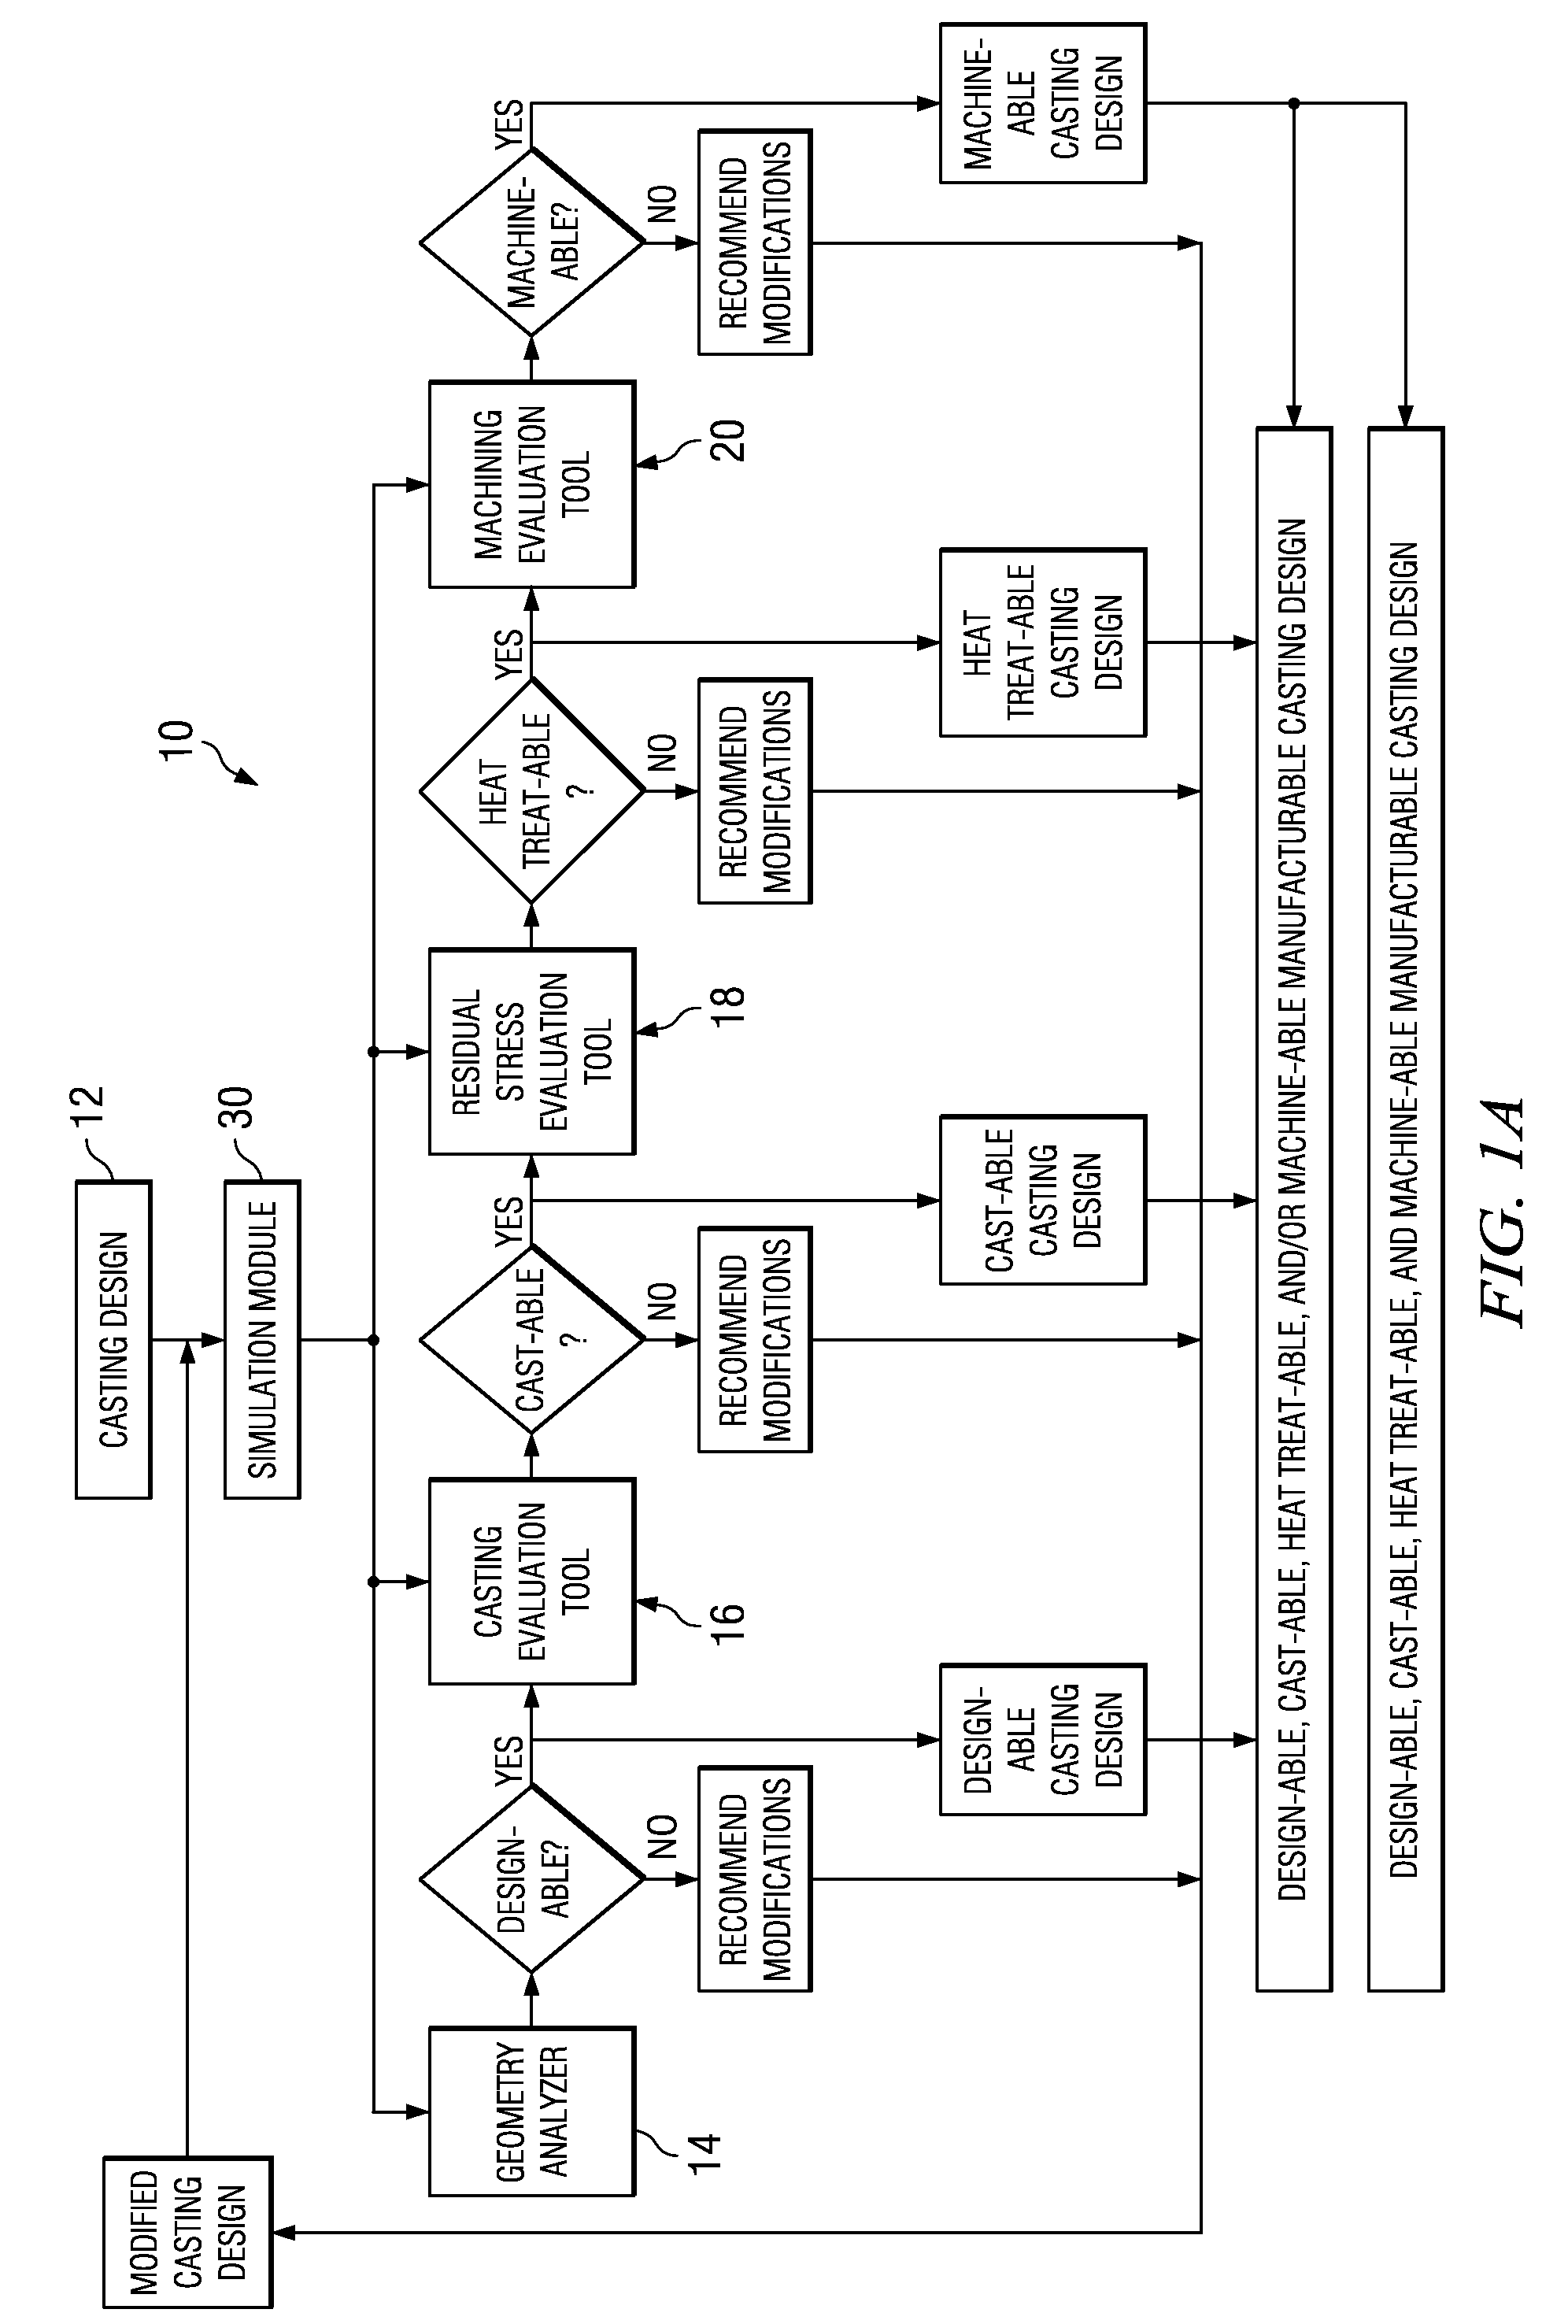 System for evaluating manufacturability of a casting design